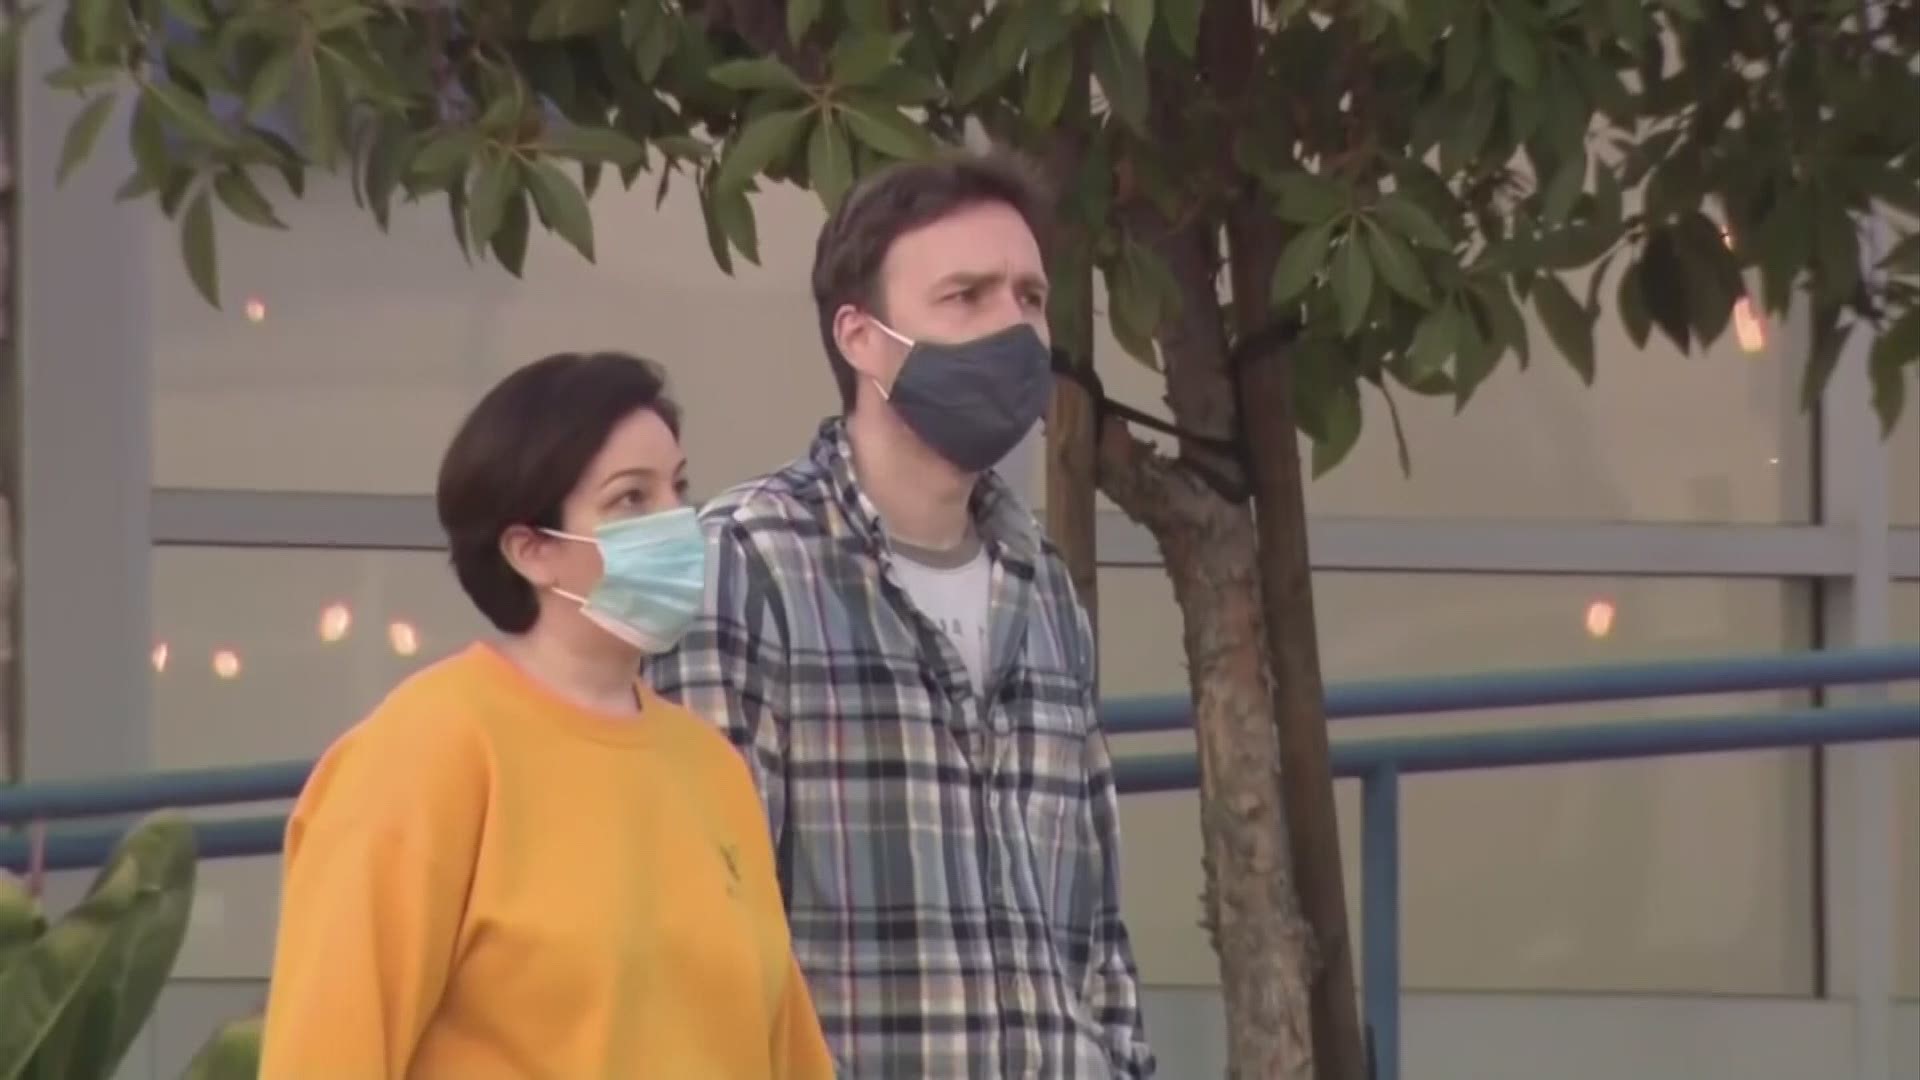 Whether you're still required to wear a mask or you're adjusting to no longer having to wear one, doctors say its normal to feel anxious